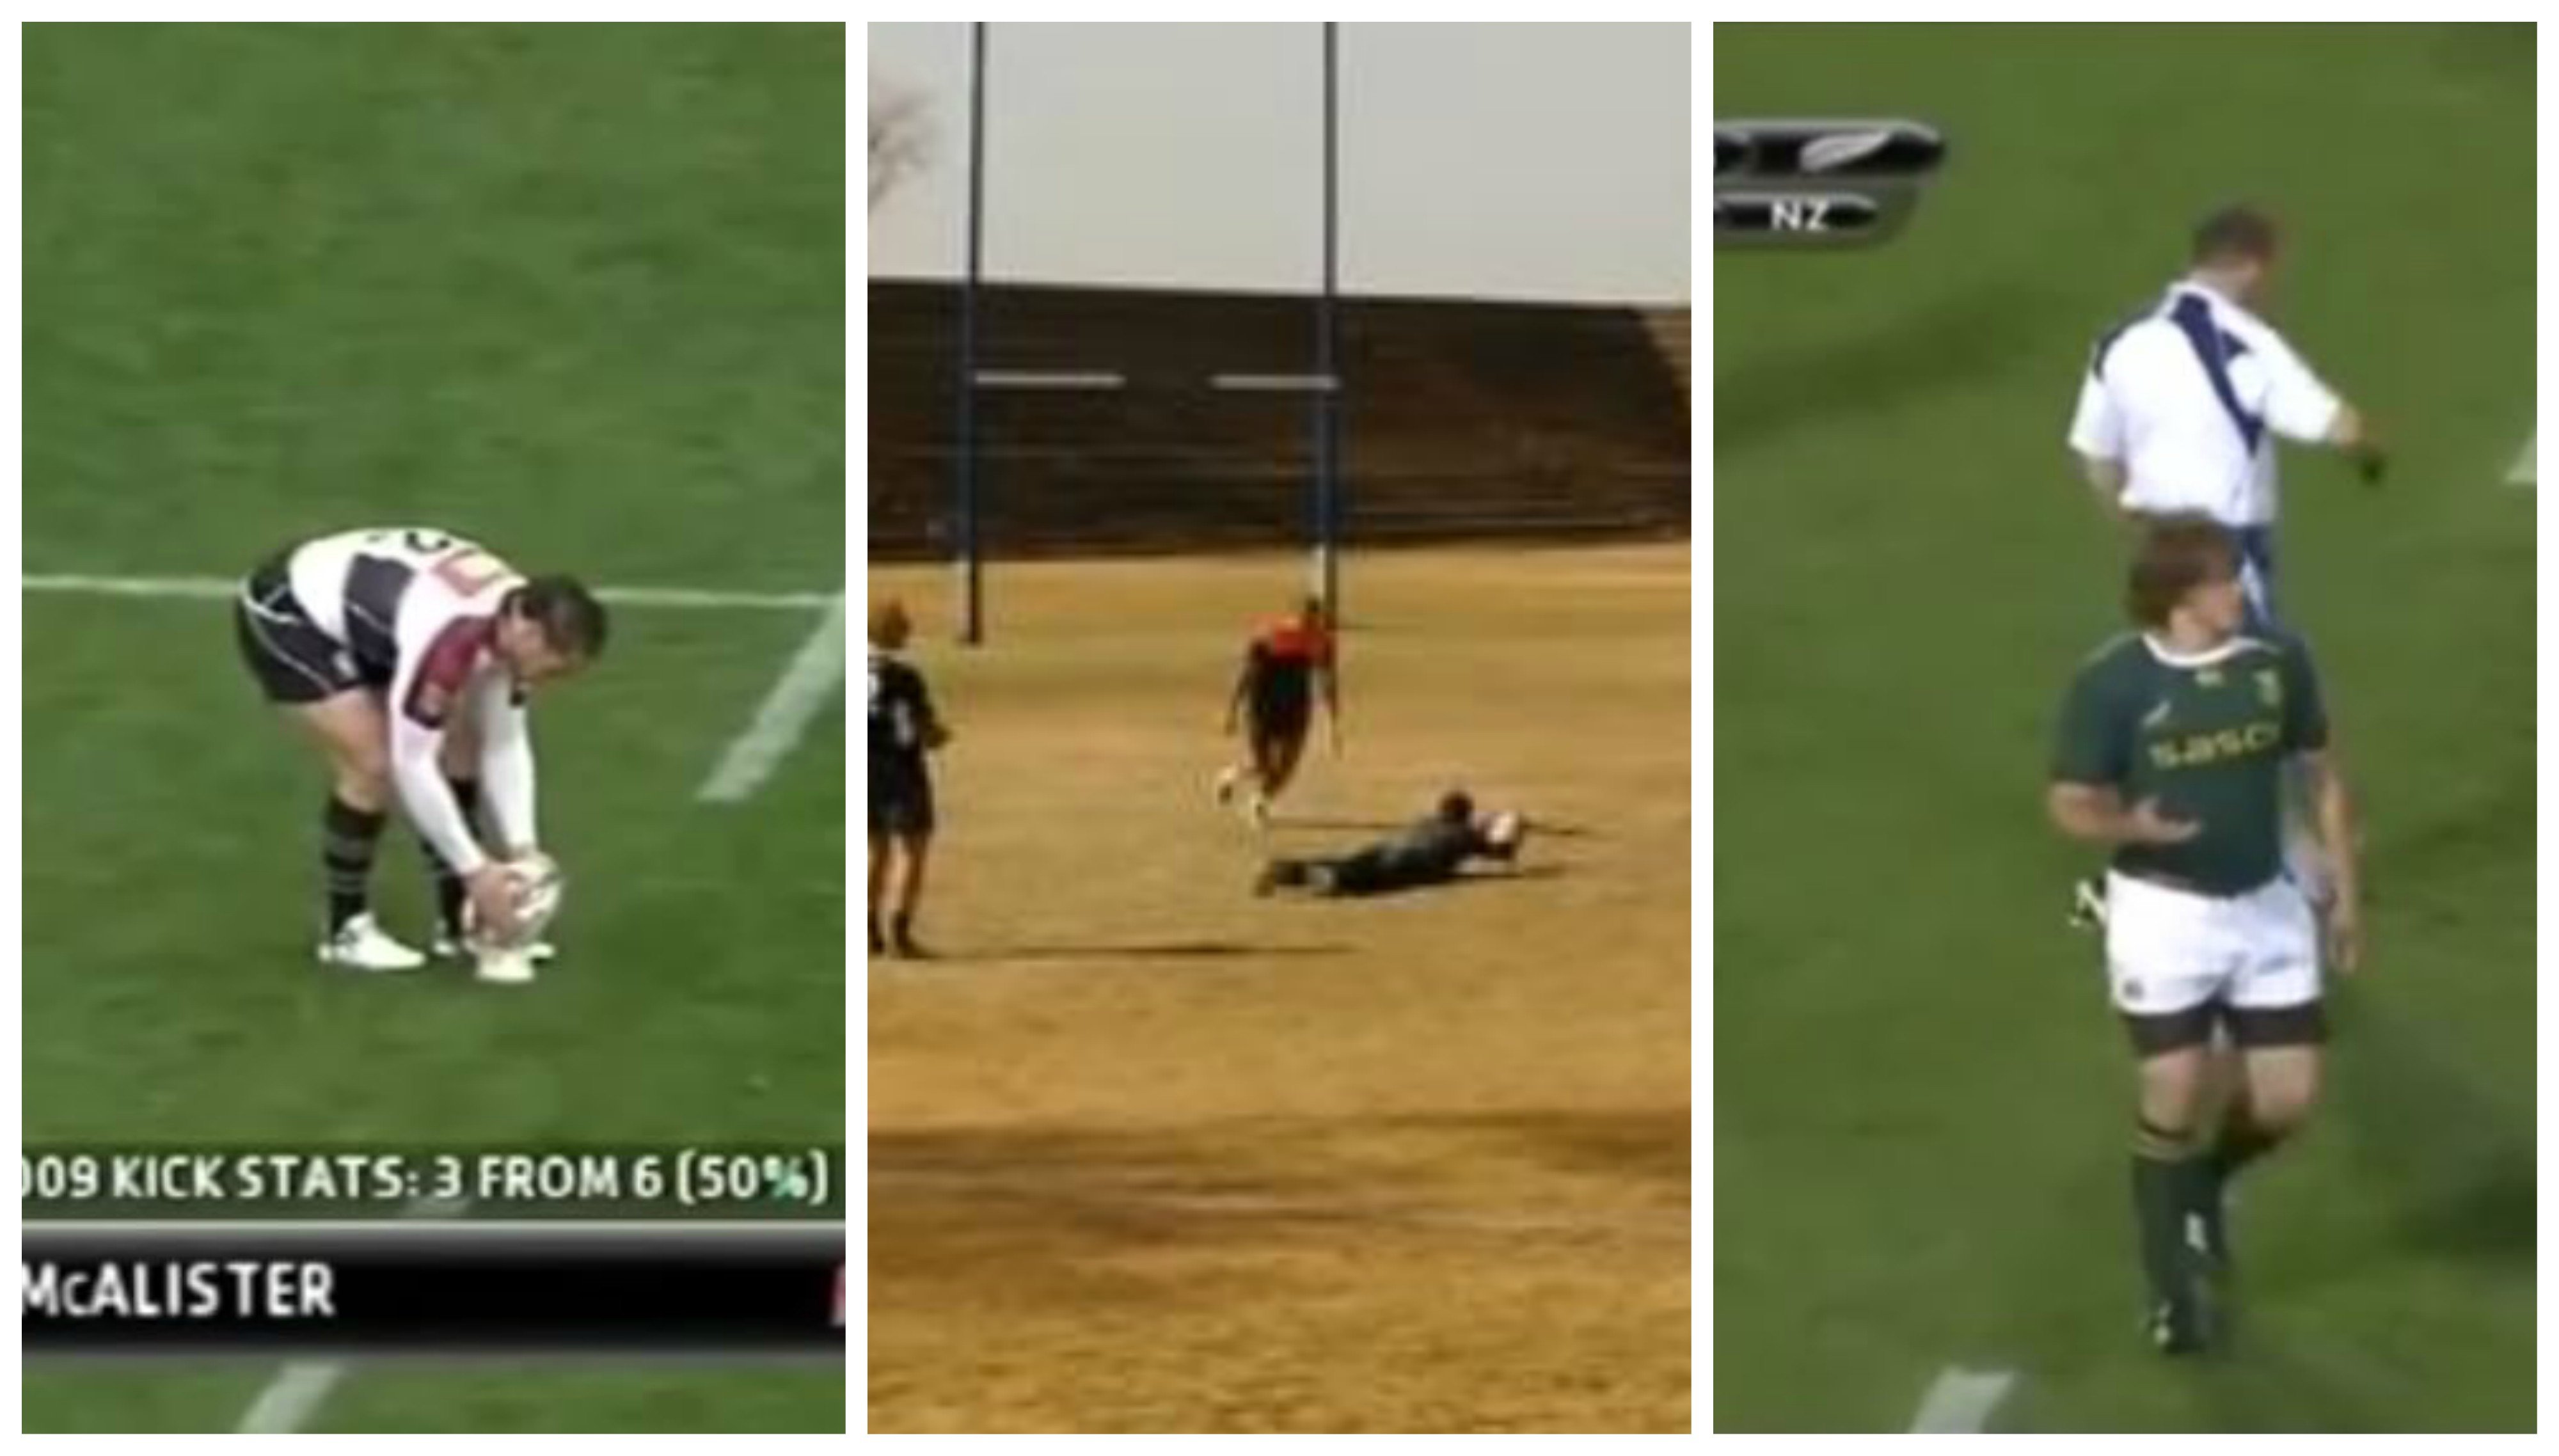 WATCH: The longest kicks at goal in rugby history